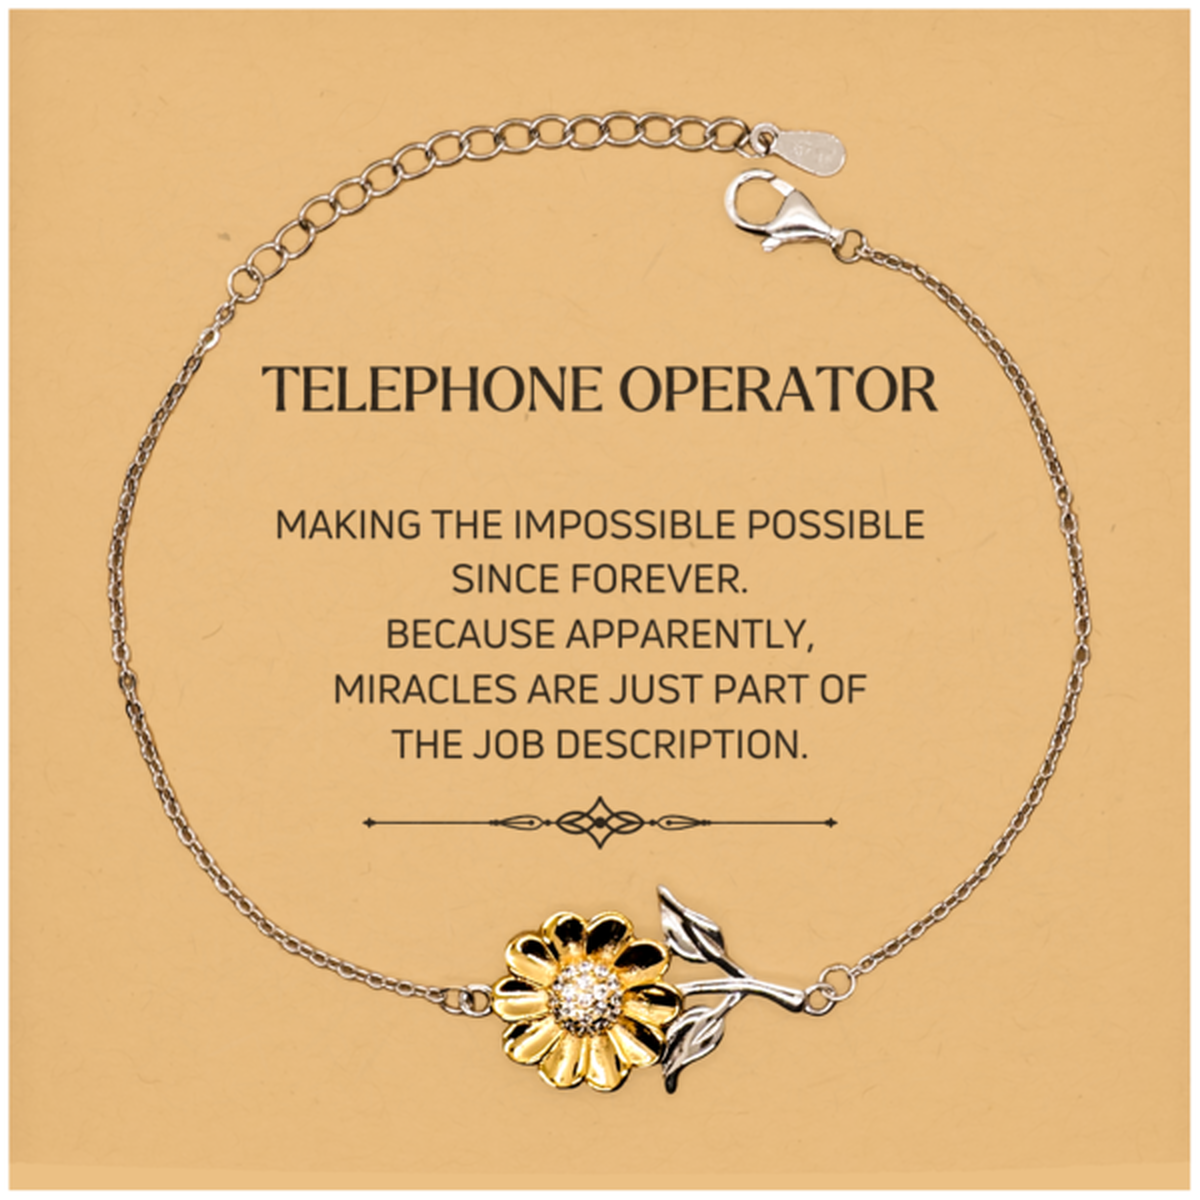 Funny Telephone Operator Gifts, Miracles are just part of the job description, Inspirational Birthday Christmas Sunflower Bracelet For Telephone Operator, Men, Women, Coworkers, Friends, Boss